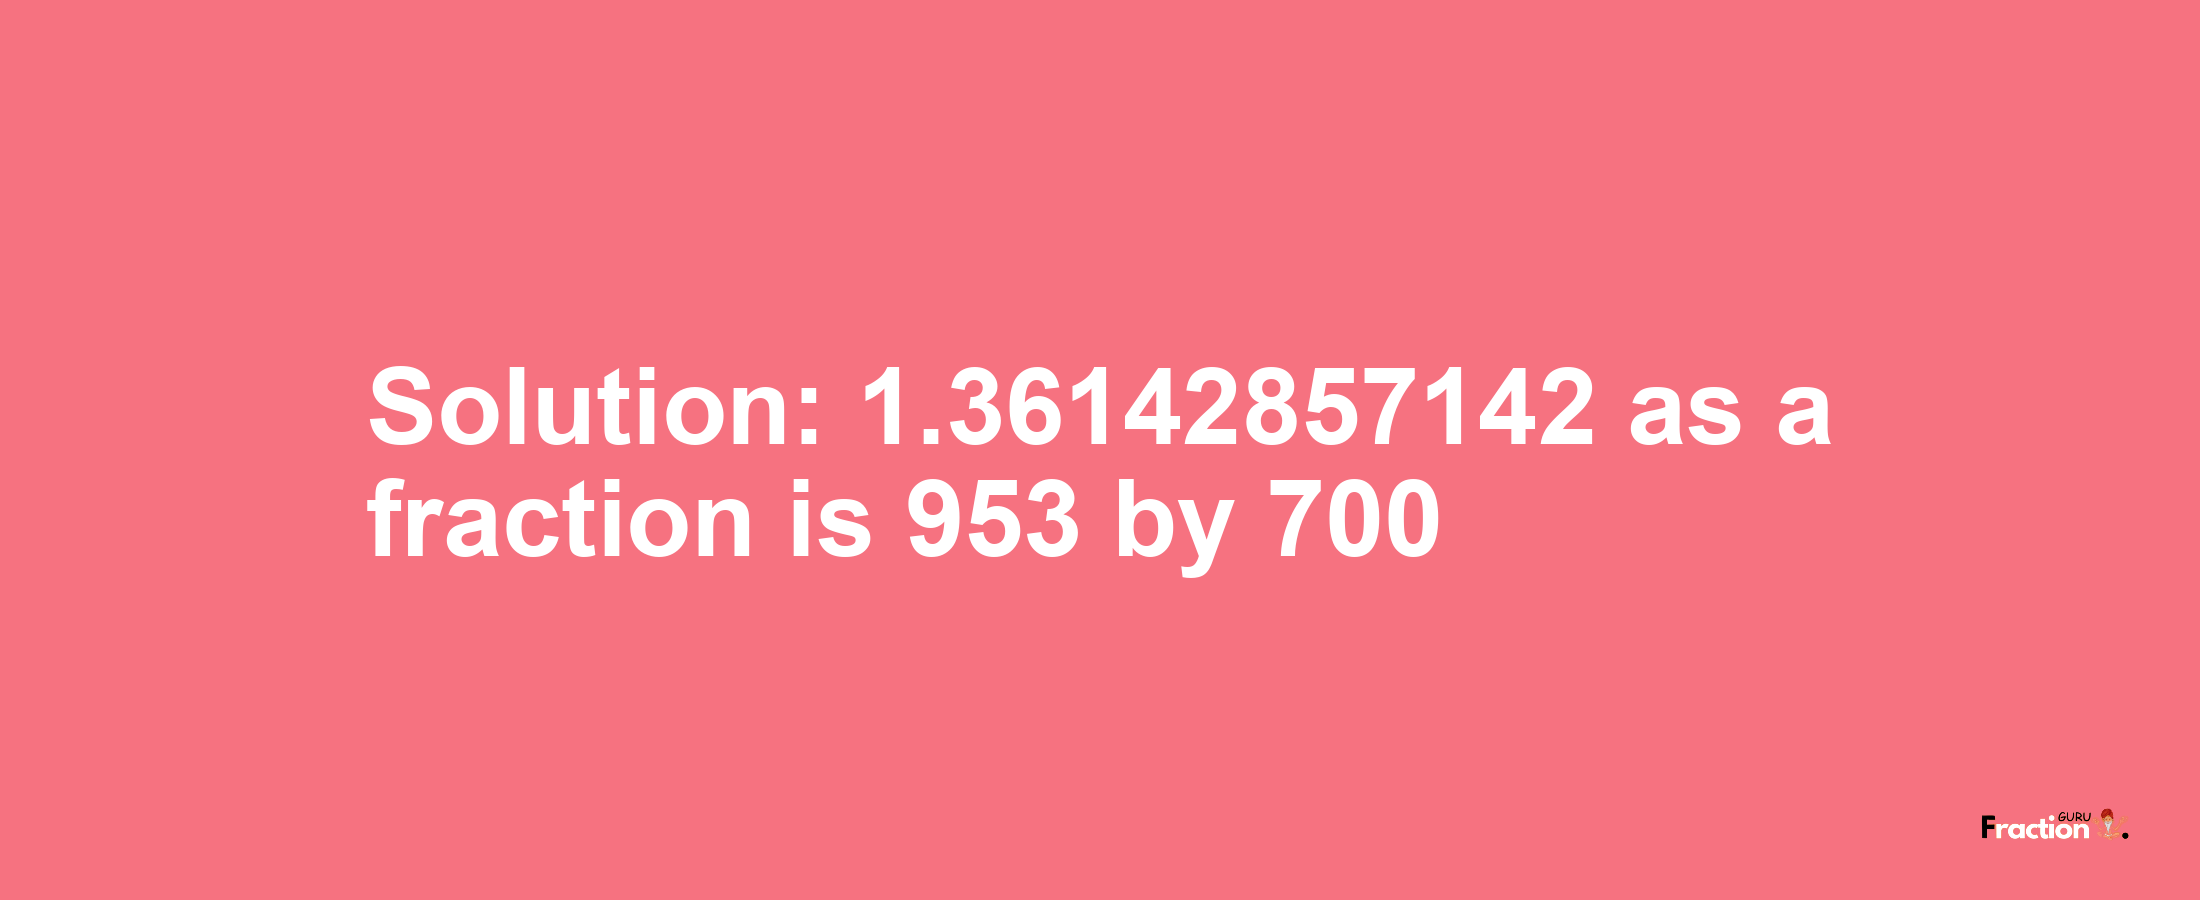 Solution:1.36142857142 as a fraction is 953/700